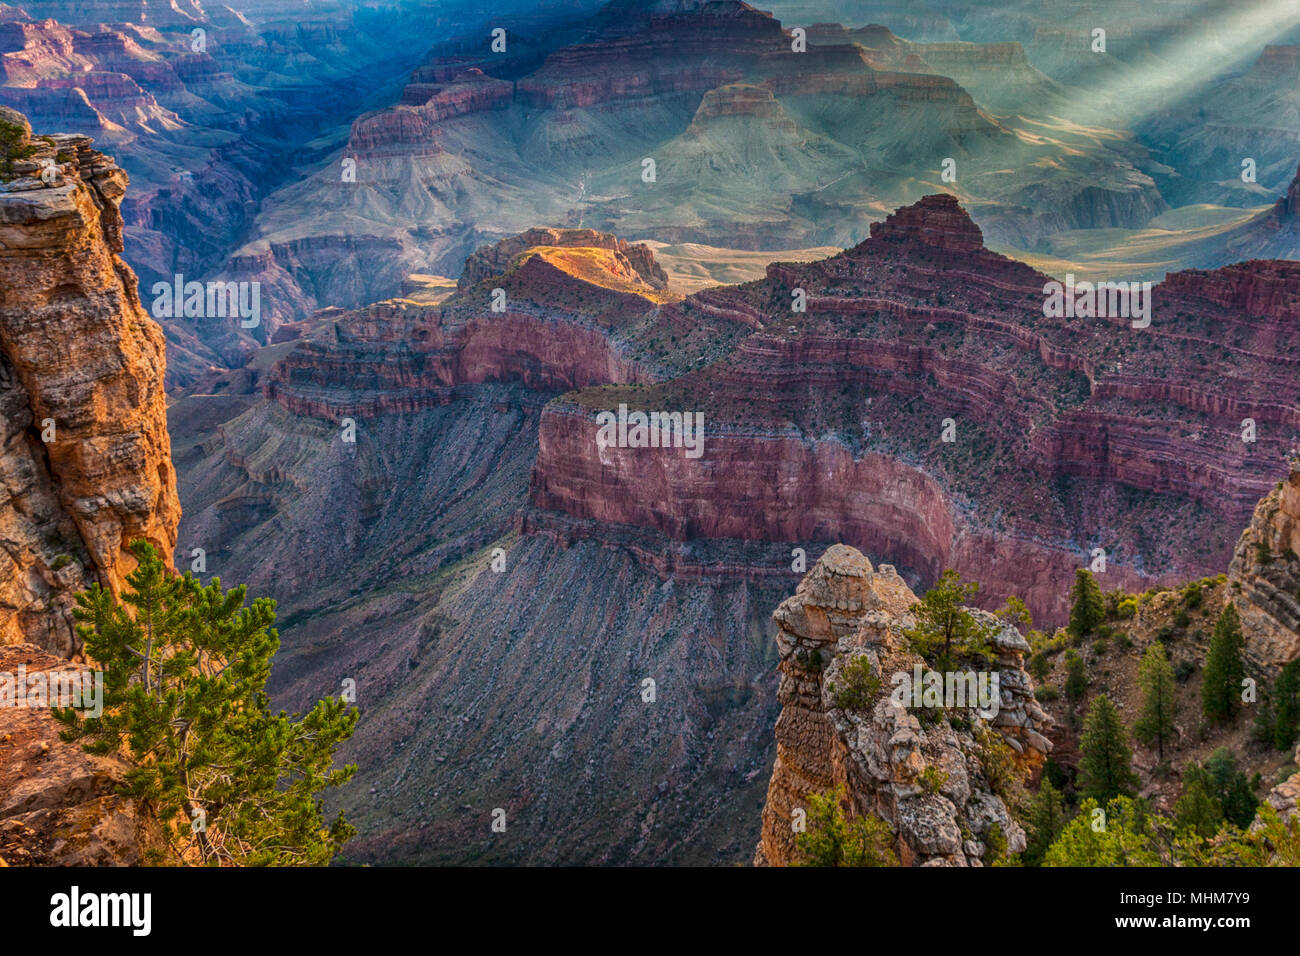 Sunrise on the South Rim of the Grand Canyon National Park in Arizona. Grand Canyon is a geological wonder, with rock layers as 'windows into time' Stock Photo